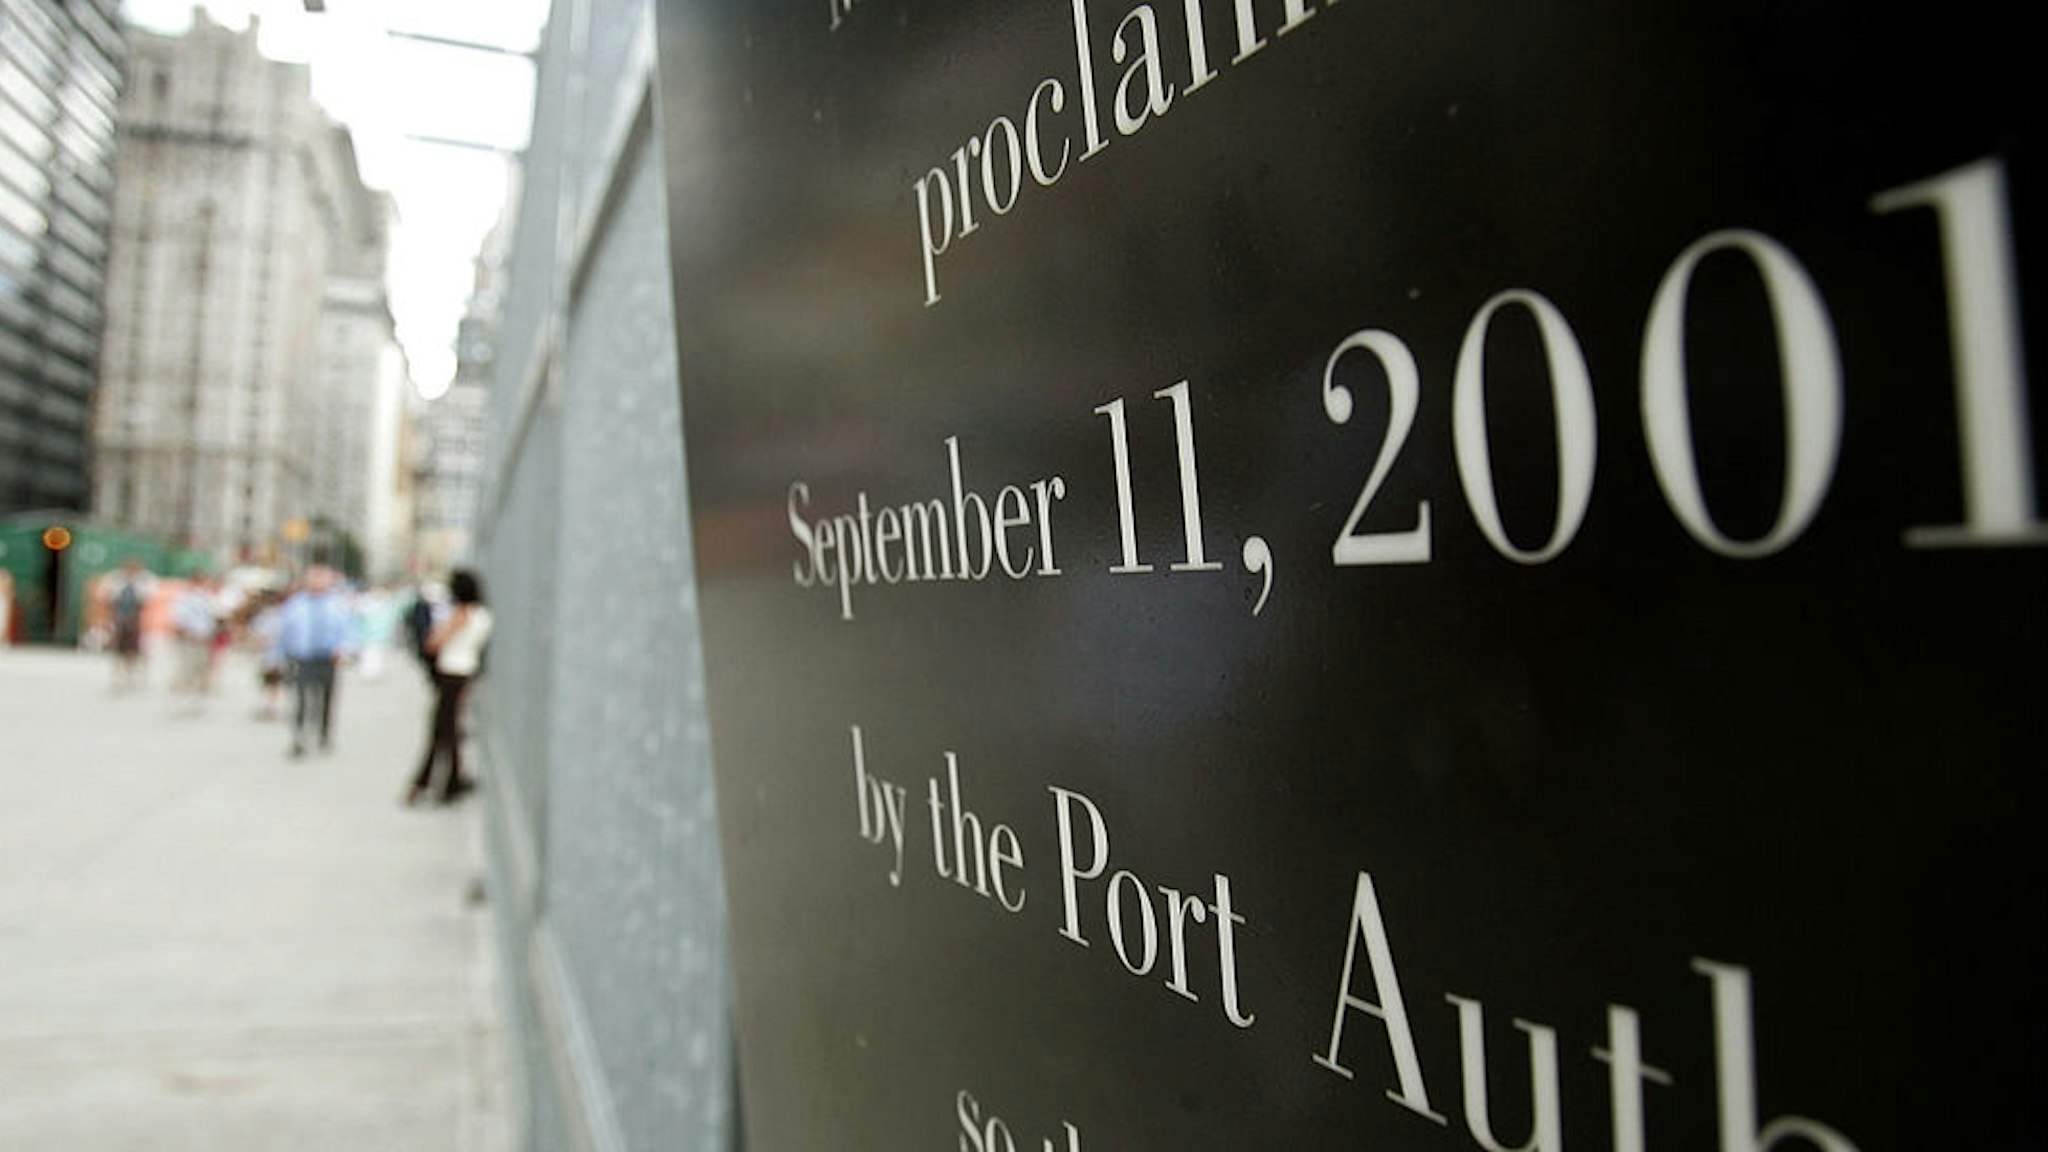 NEW YORK - AUGUST 23: A memorial sign to September 11, 2001 is shown at the former World Trade Center site August 23, 2005 in New York City. The fourth anniversary of the terrorist attacks is approaching.